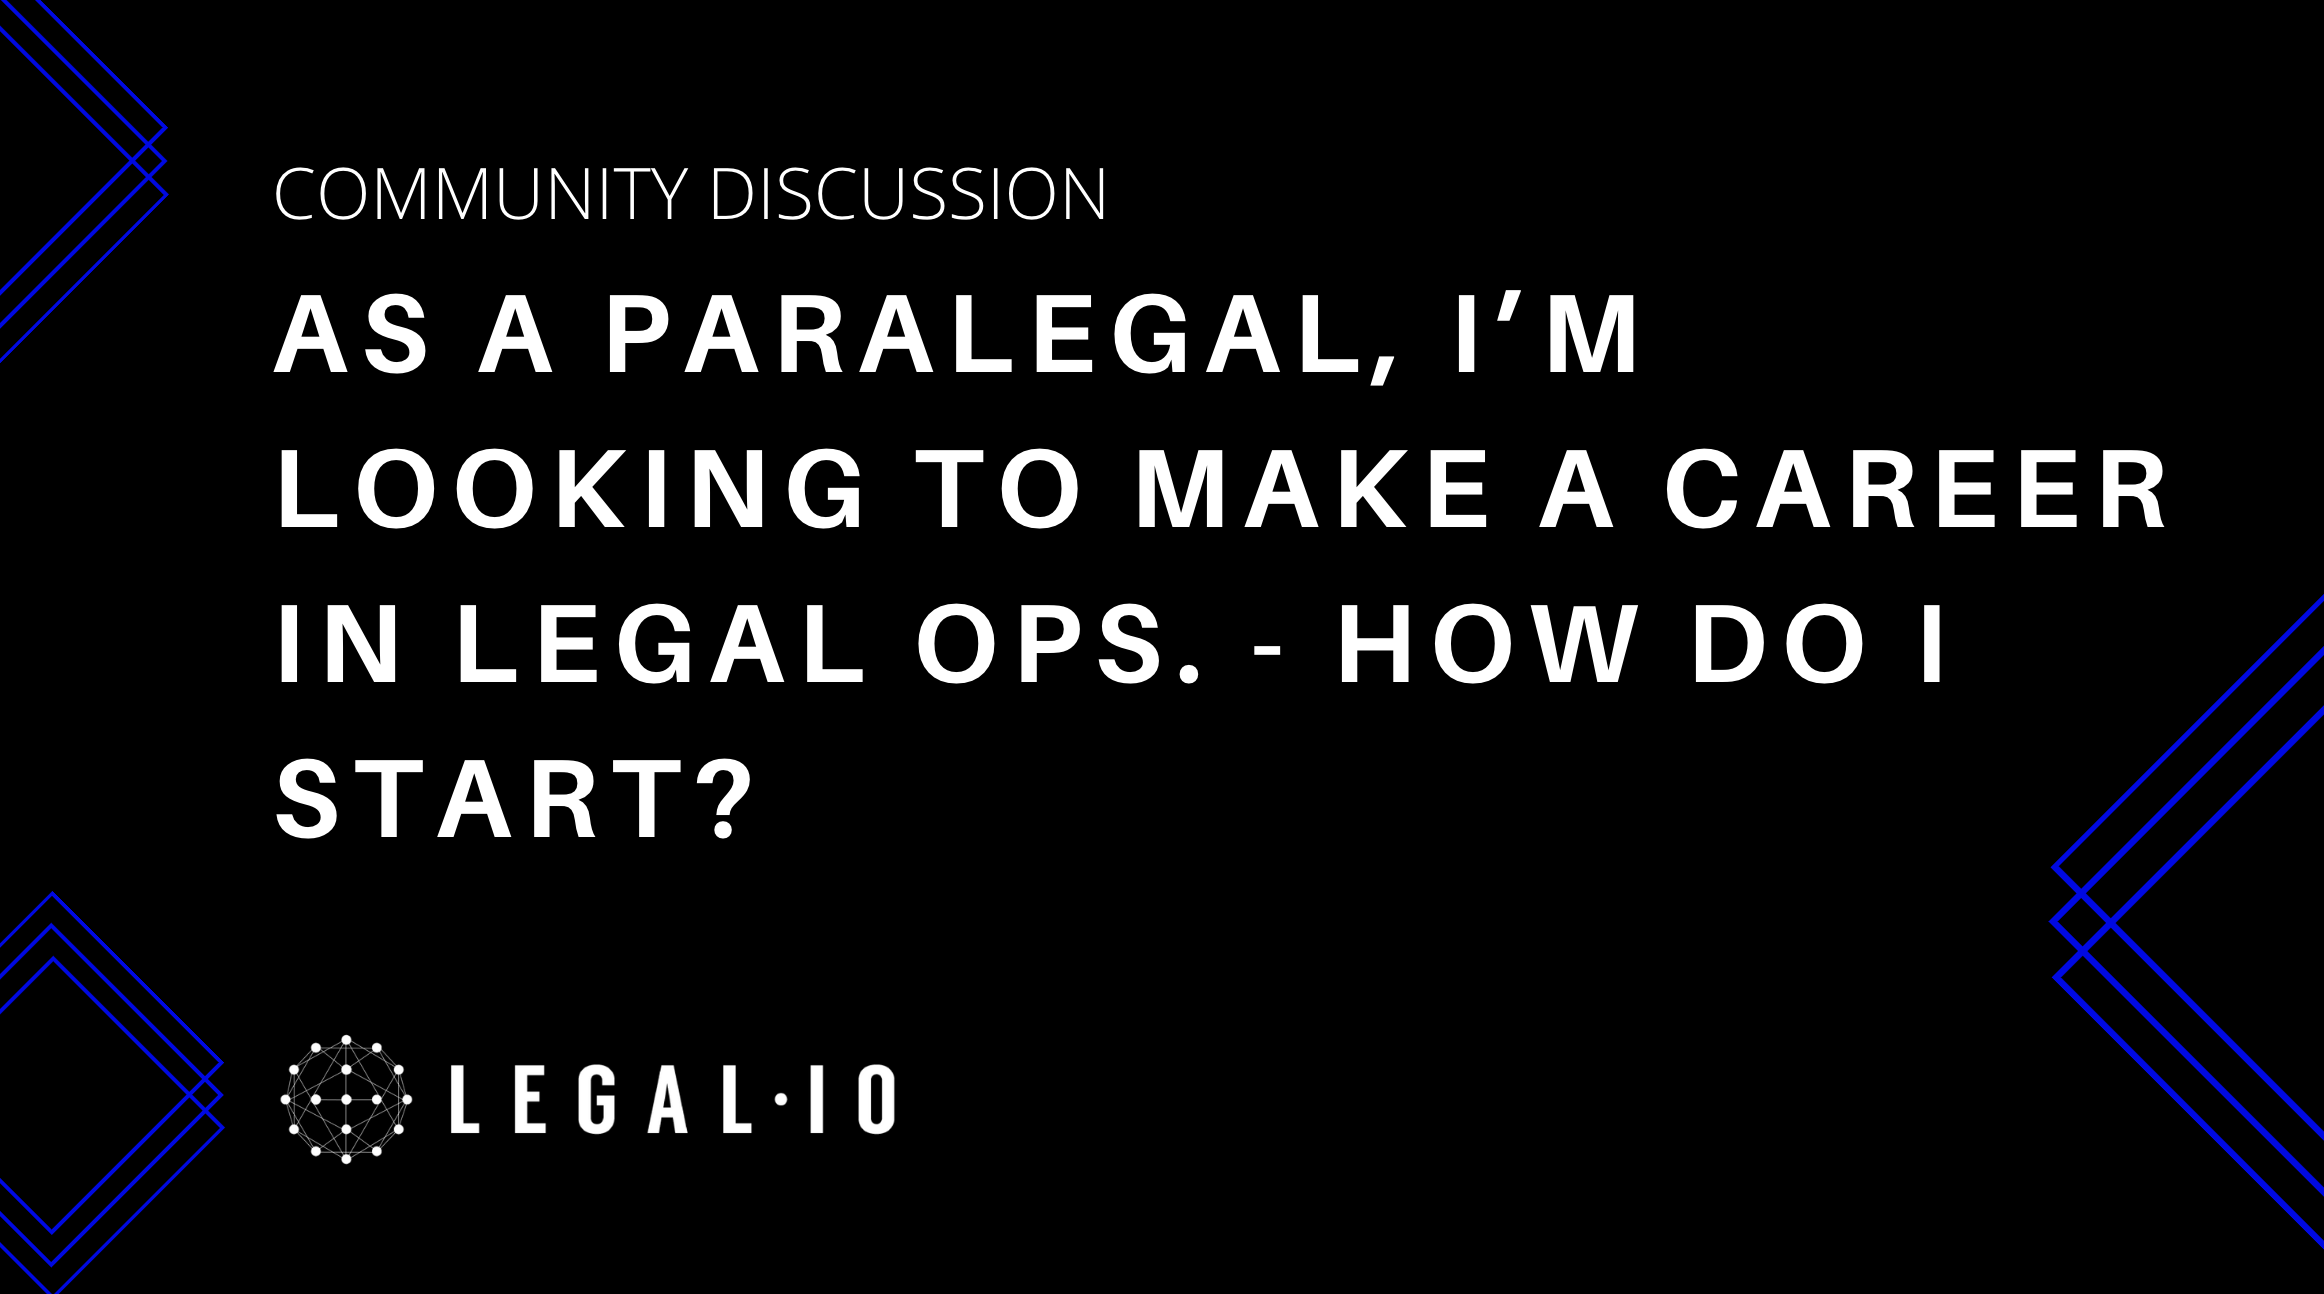 Community Perspectives: As a paralegal, I'm looking to make a career in Legal Ops. How do I start?